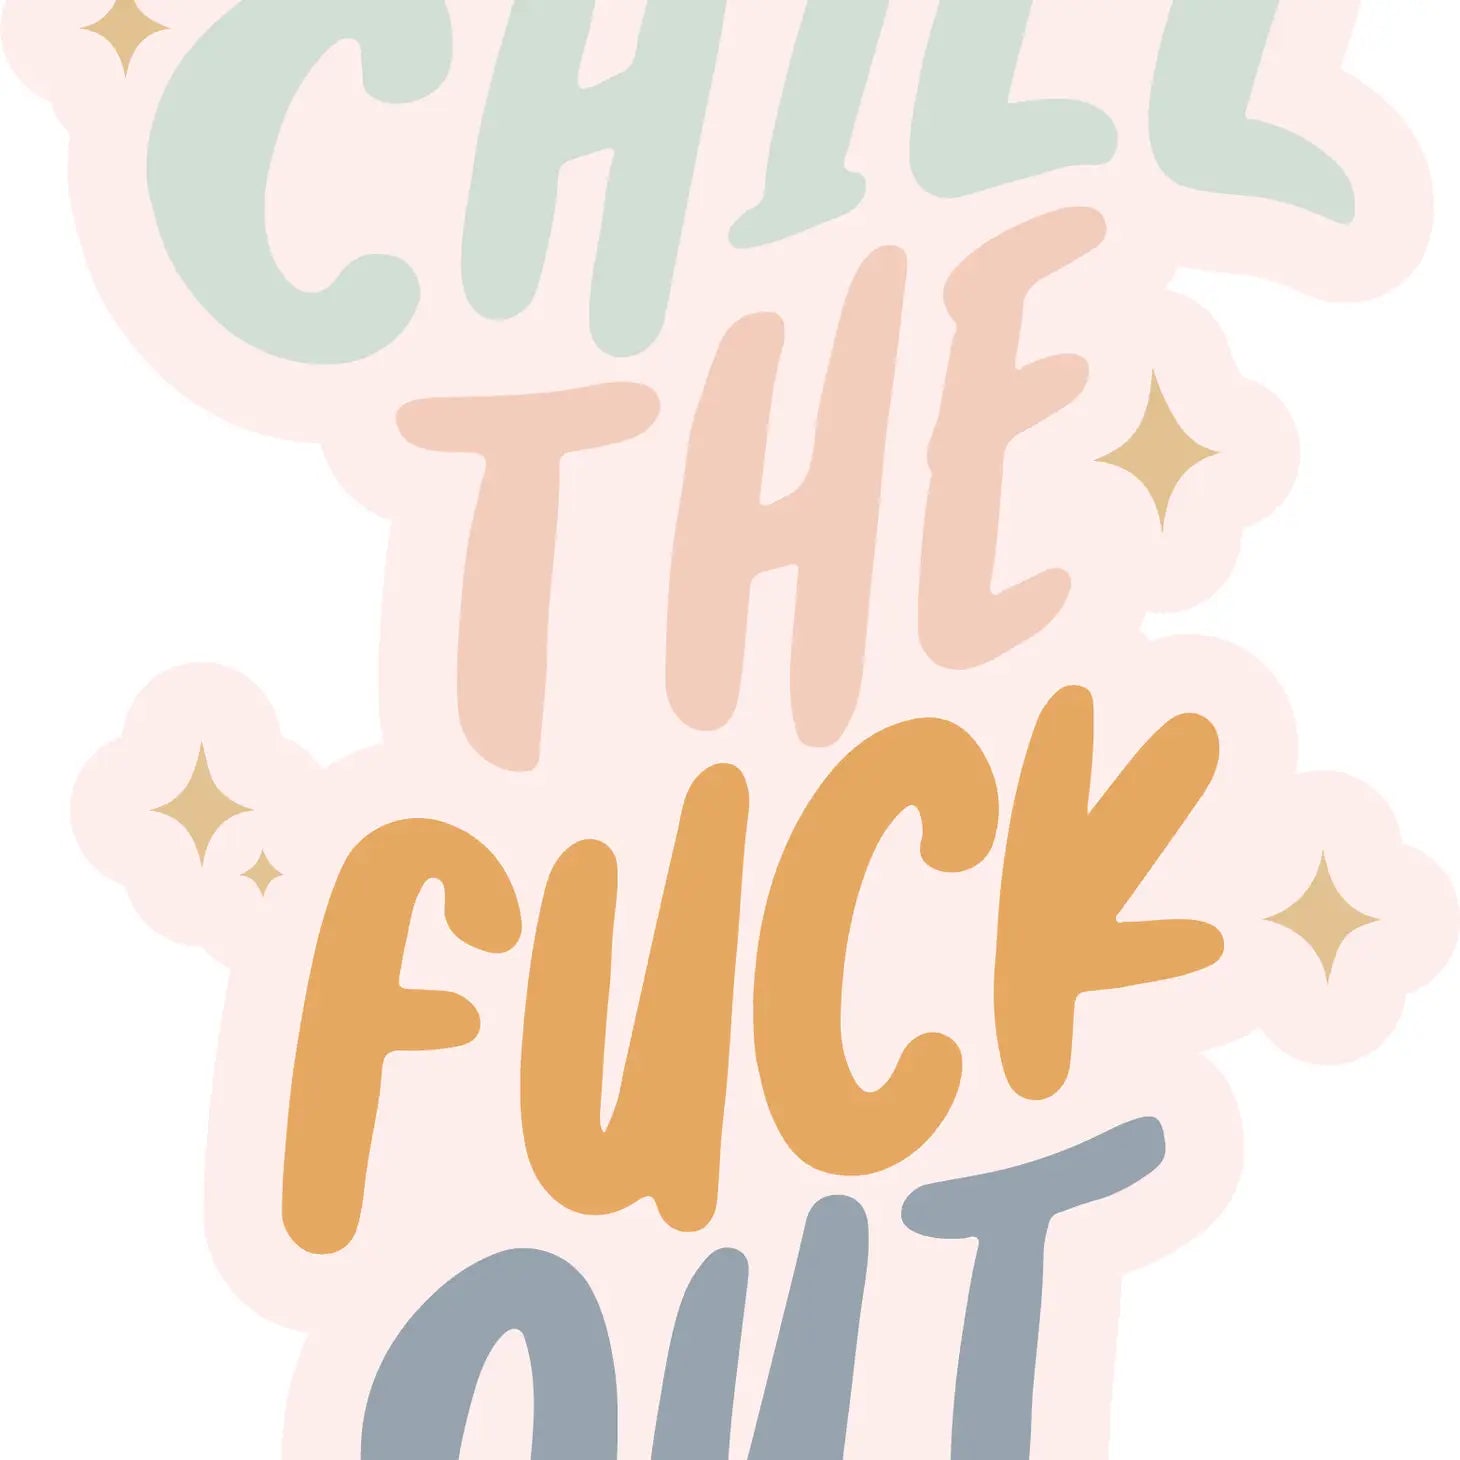 Chill The Fuck Out - Sticker